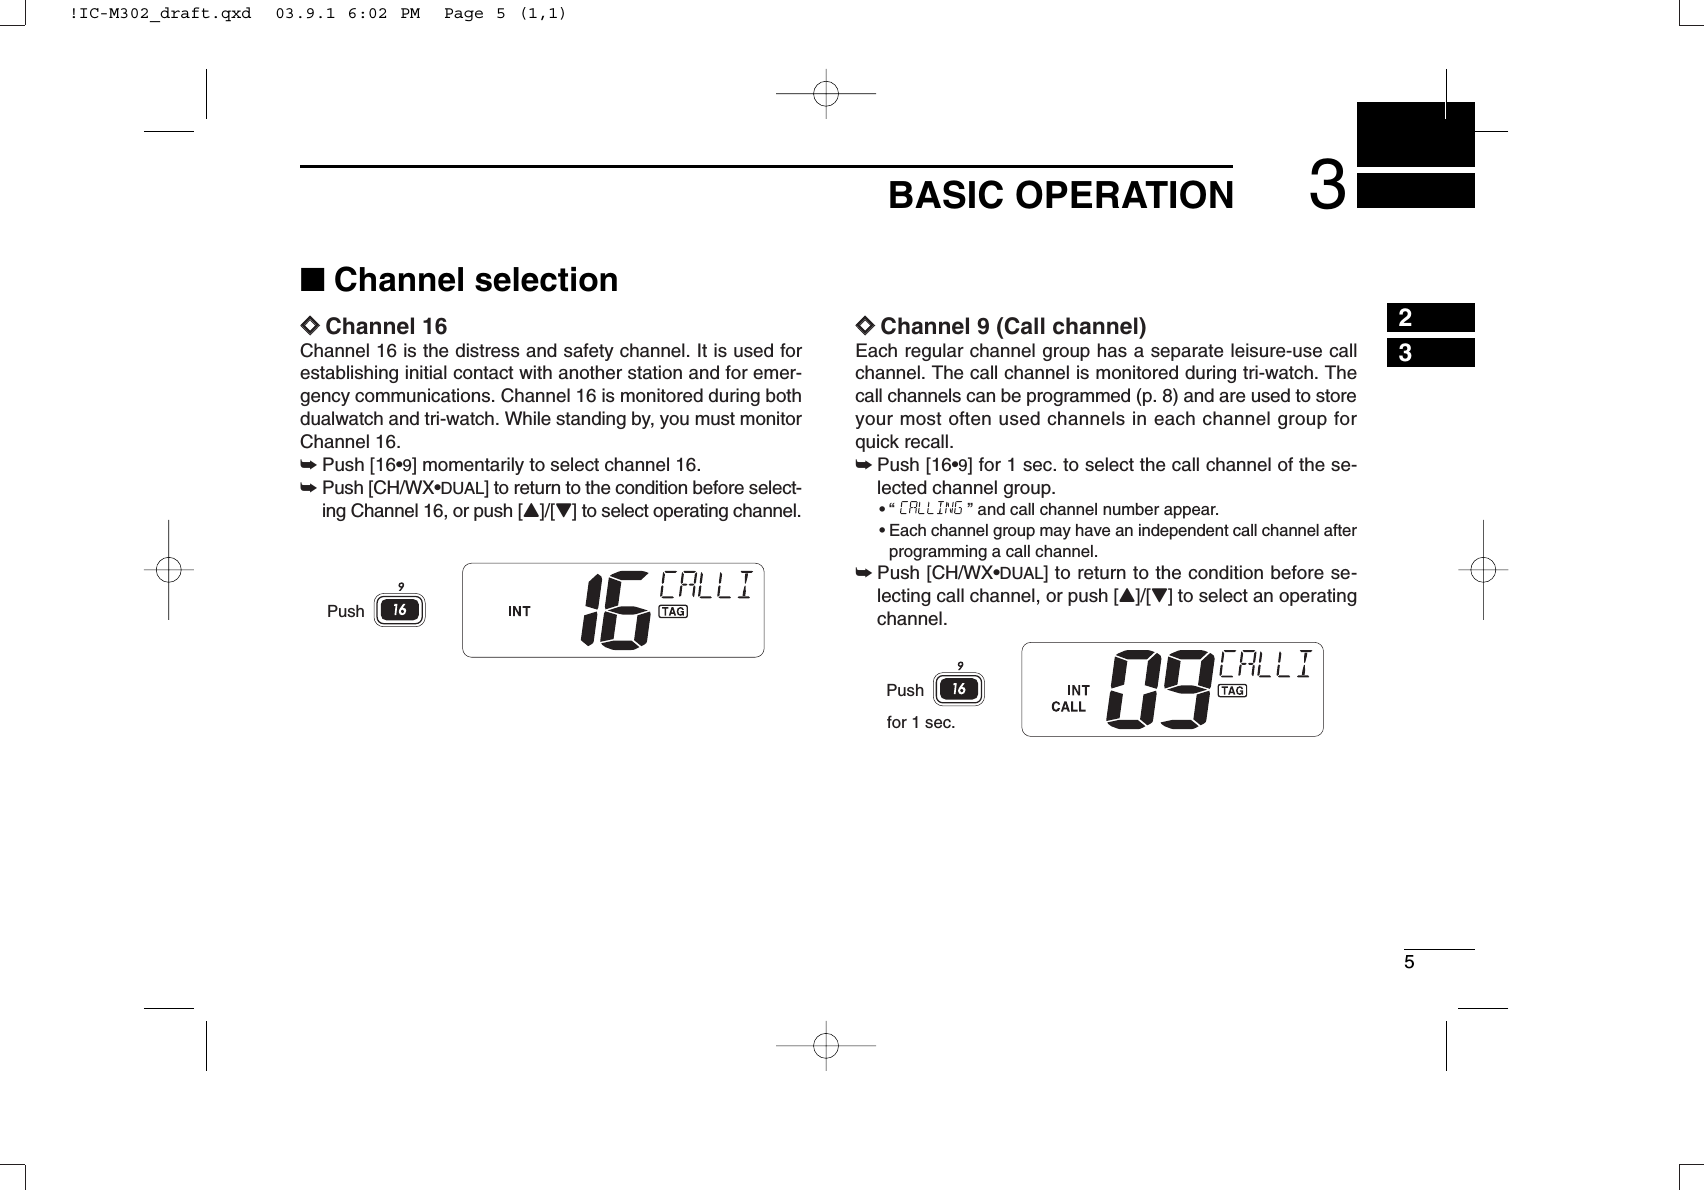 53BASIC OPERATION23■Channel selectionïïChannel 16Channel 16 is the distress and safety channel. It is used forestablishing initial contact with another station and for emer-gency communications. Channel 16 is monitored during bothdualwatch and tri-watch. While standing by, you must monitorChannel 16.➥Push [16•9] momentarily to select channel 16.➥Push [CH/WX•DUAL] to return to the condition before select-ing Channel 16, or push [Y]/[Z] to select operating channel.ïïChannel 9 (Call channel)Each regular channel group has a separate leisure-use callchannel. The call channel is monitored during tri-watch. Thecall channels can be programmed (p. 8) and are used to storeyour most often used channels in each channel group forquick recall.➥Push [16•9] for 1 sec. to select the call channel of the se-lected channel group.•“ ” and call channel number appear.•Each channel group may have an independent call channel afterprogramming a call channel.➥Push [CH/WX•DUAL] to return to the condition before se-lecting call channel, or push [Y]/[Z] to select an operatingchannel.for 1 sec.PushPush!IC-M302_draft.qxd  03.9.1 6:02 PM  Page 5 (1,1)